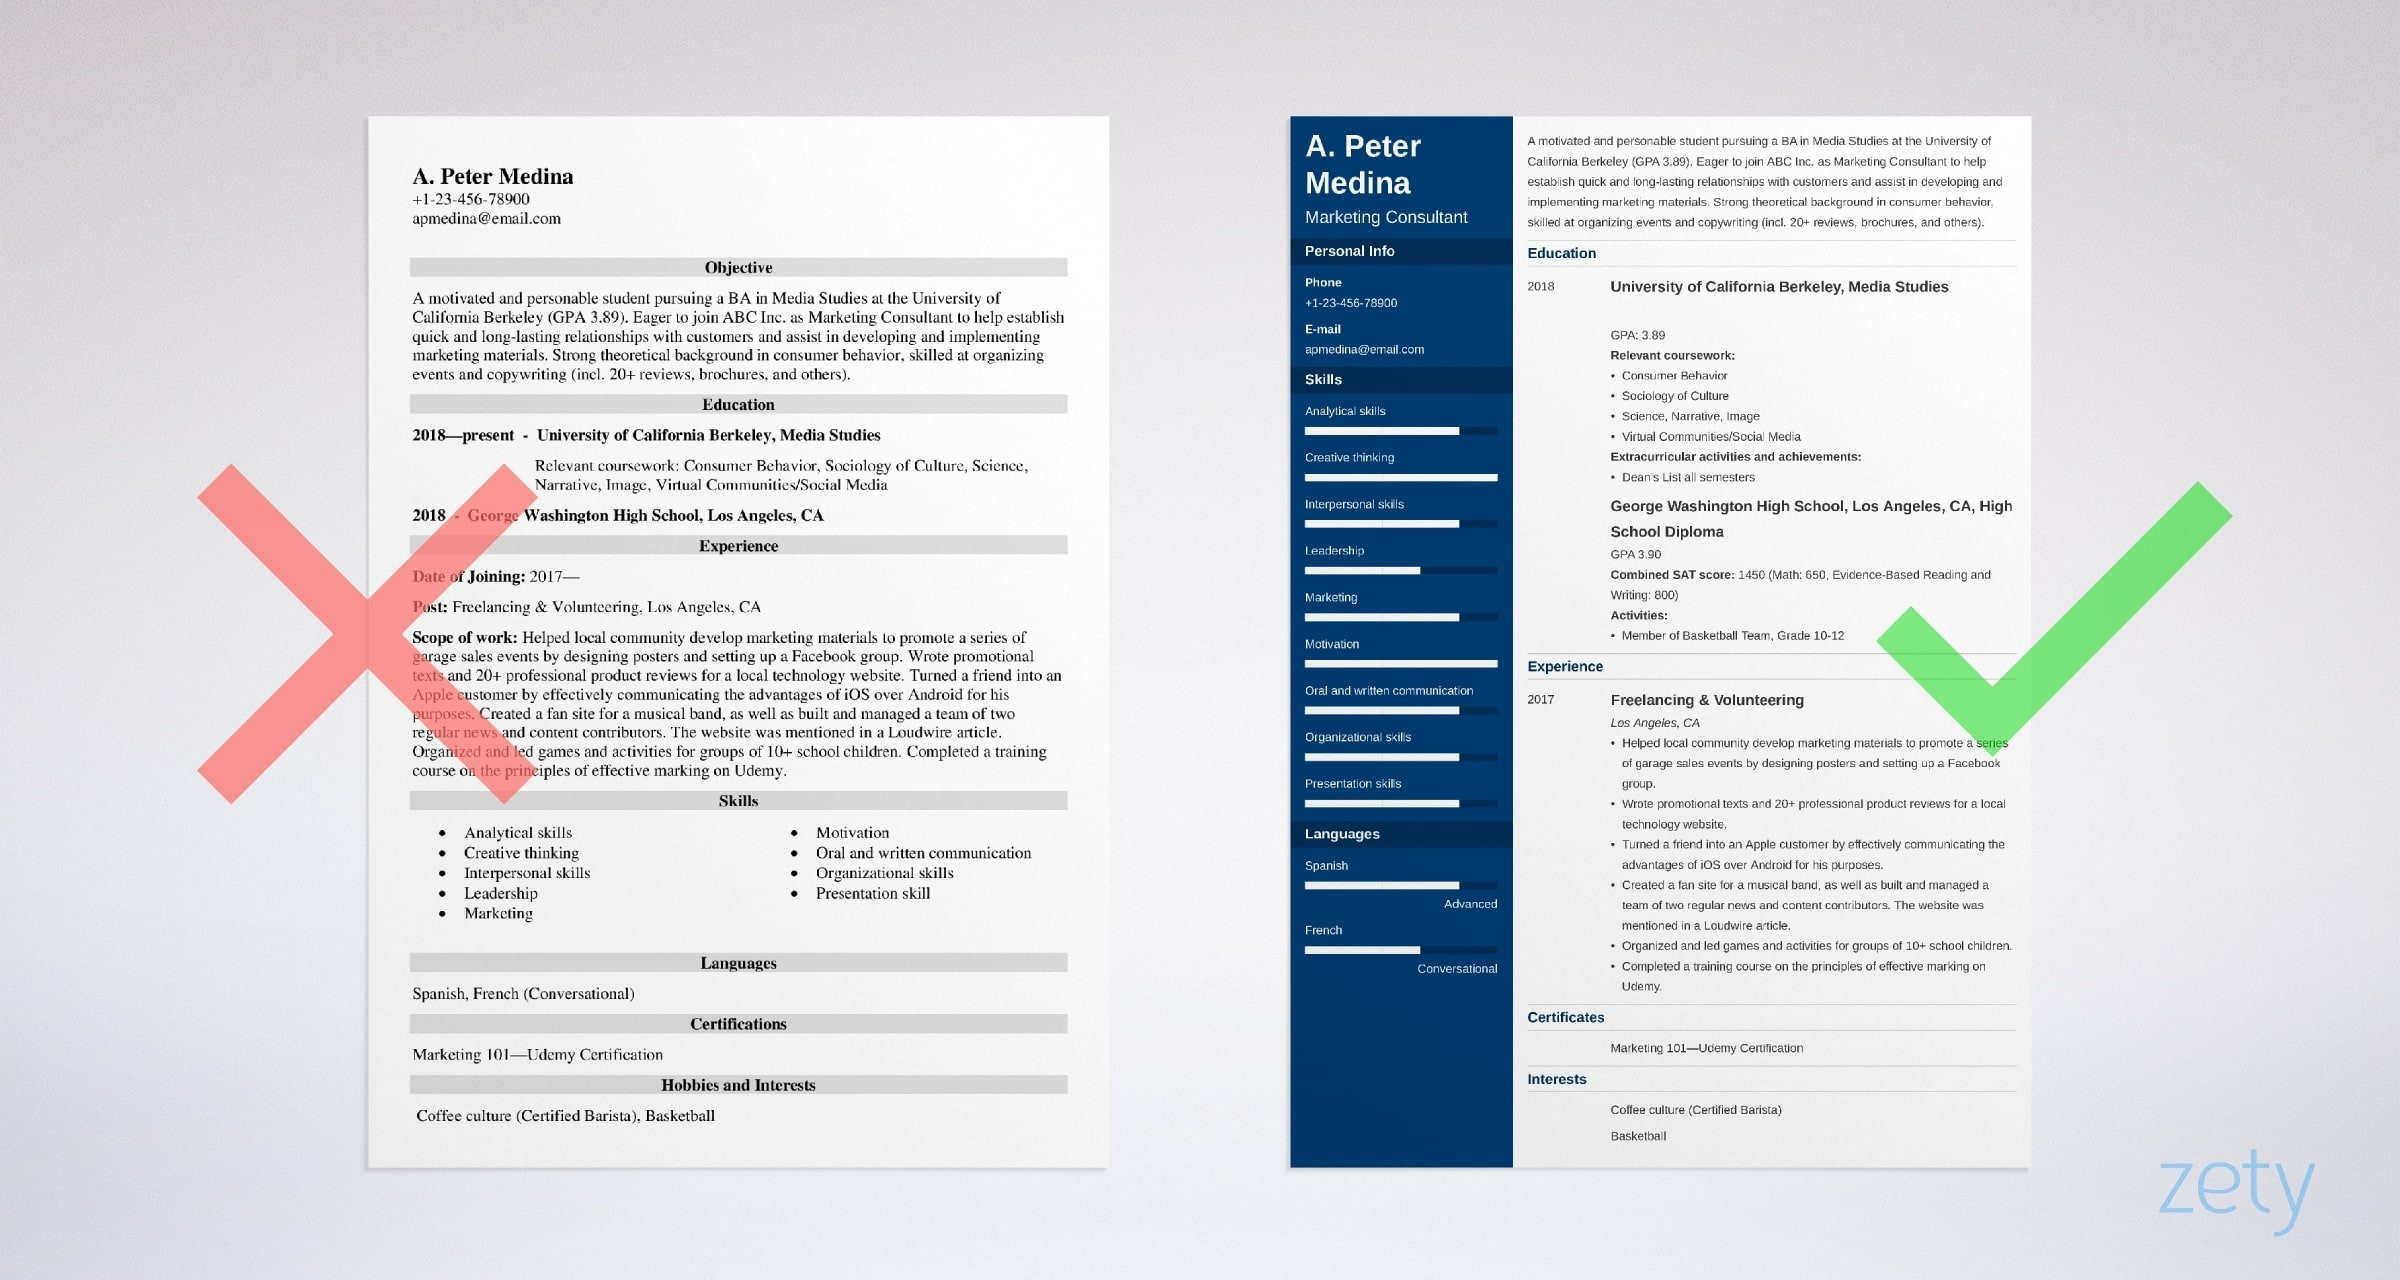 Sample Resume Objectives for No Work Experience How to Write A Resume with No Experience & Get the First Job